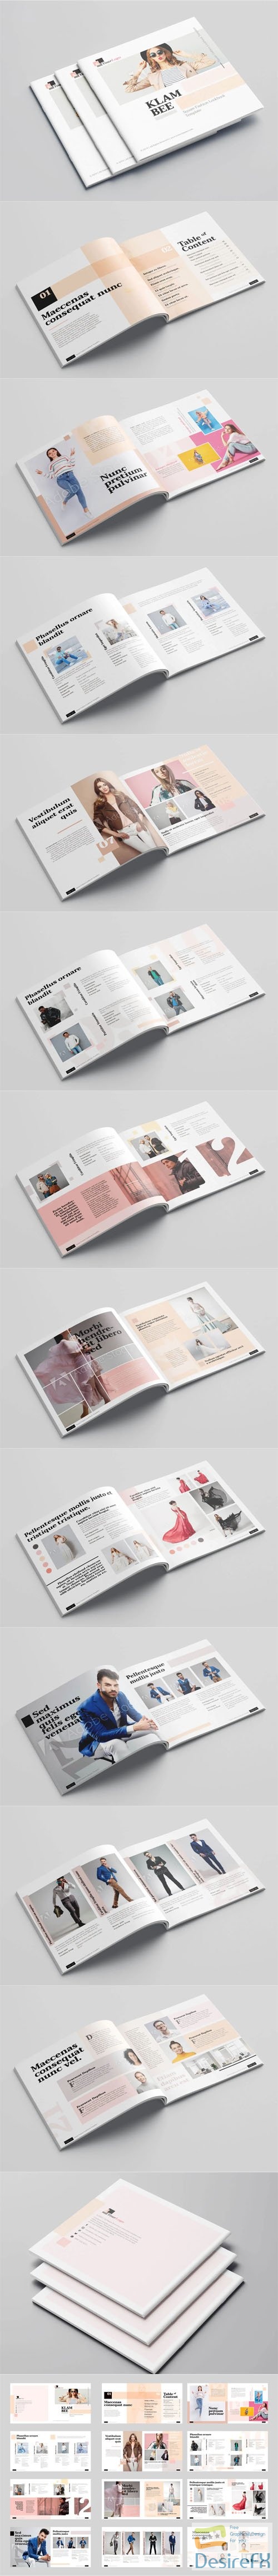 Square Fashion Lookbook INDD Template 24 Pages